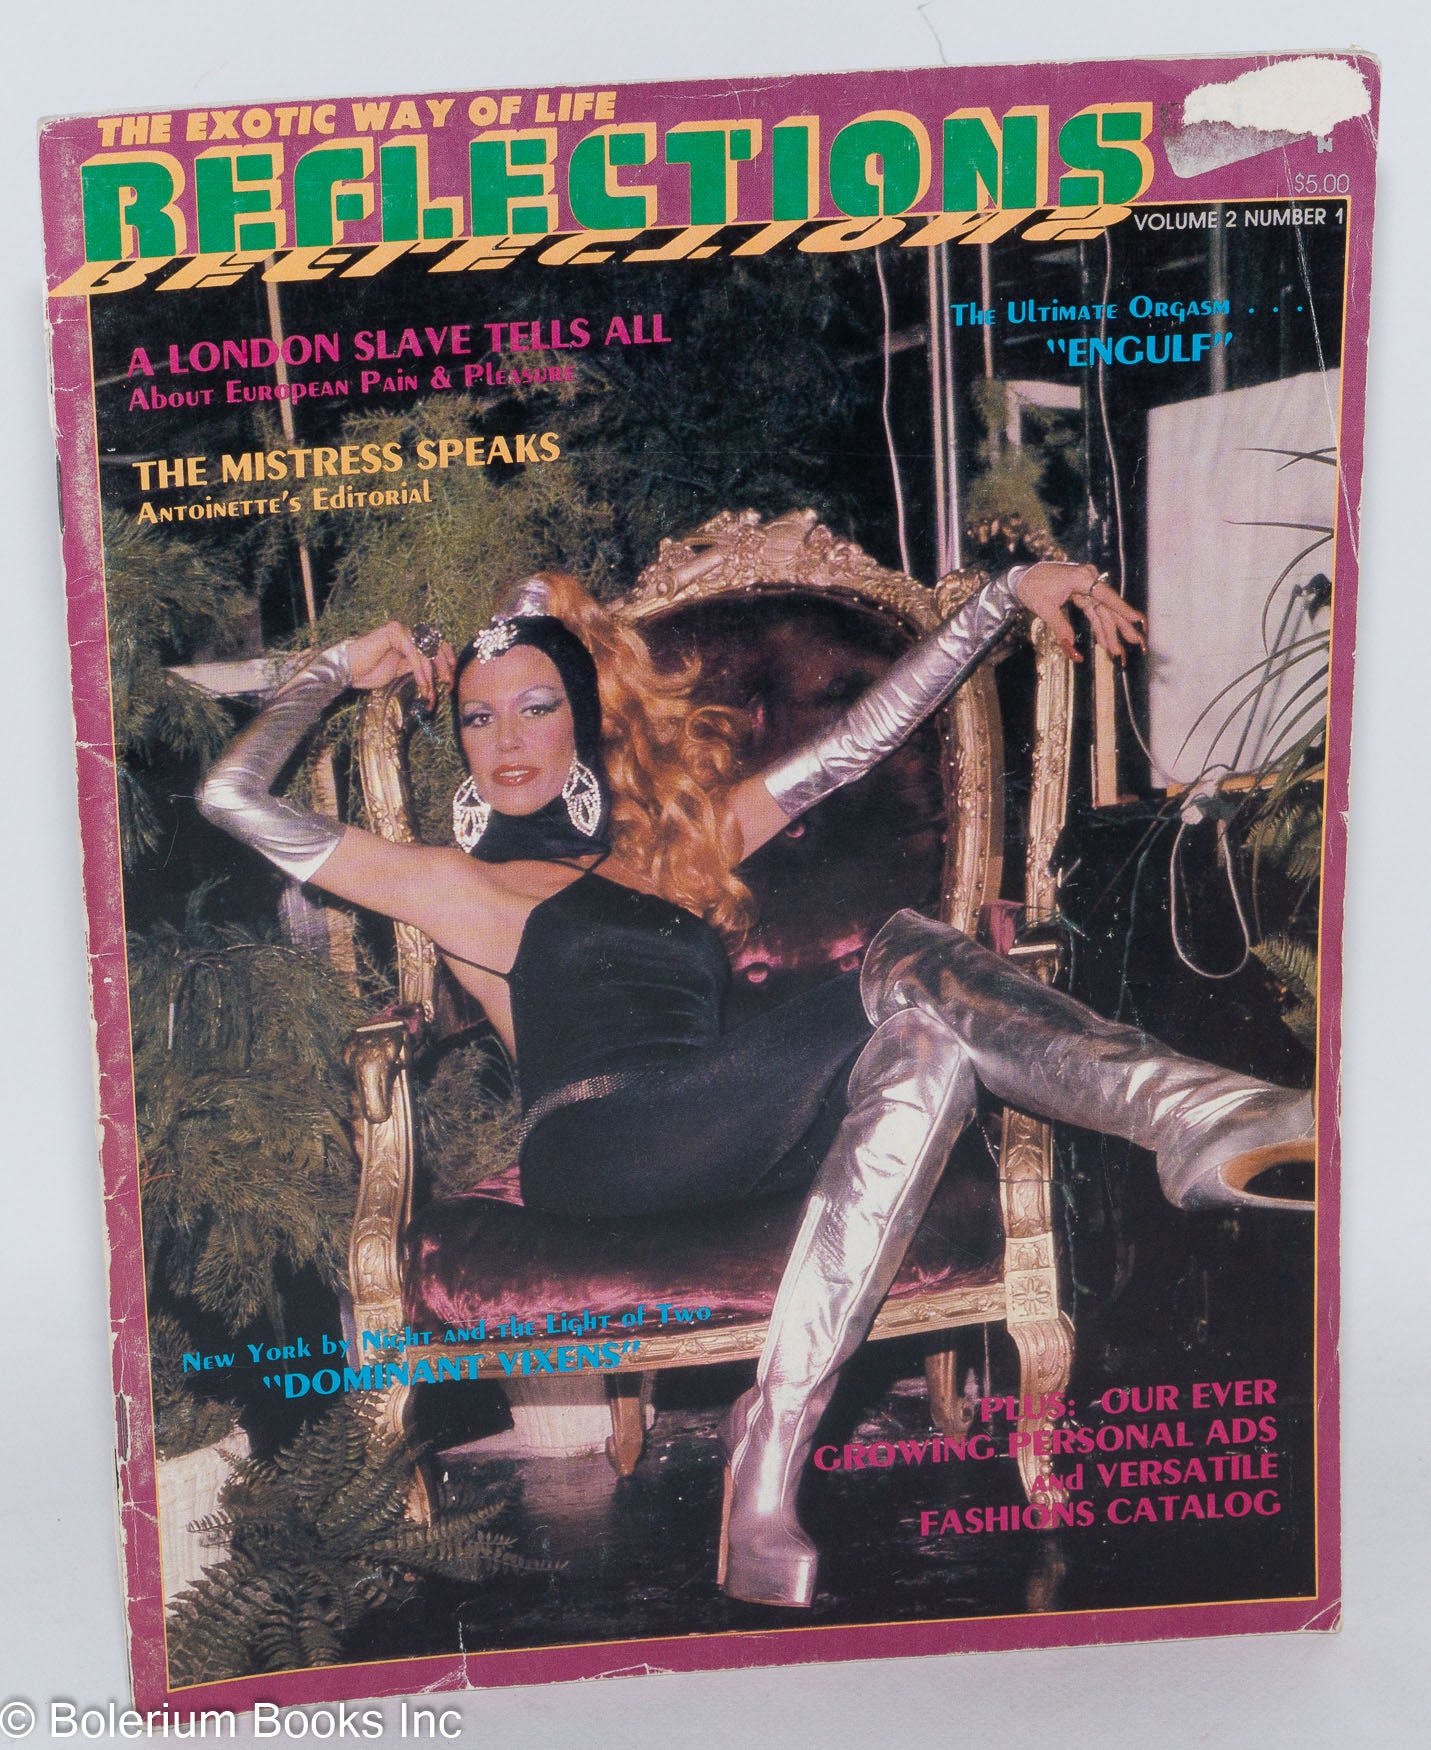 Reflections: the exotic way of life; vol. 2, #1: The Mistress